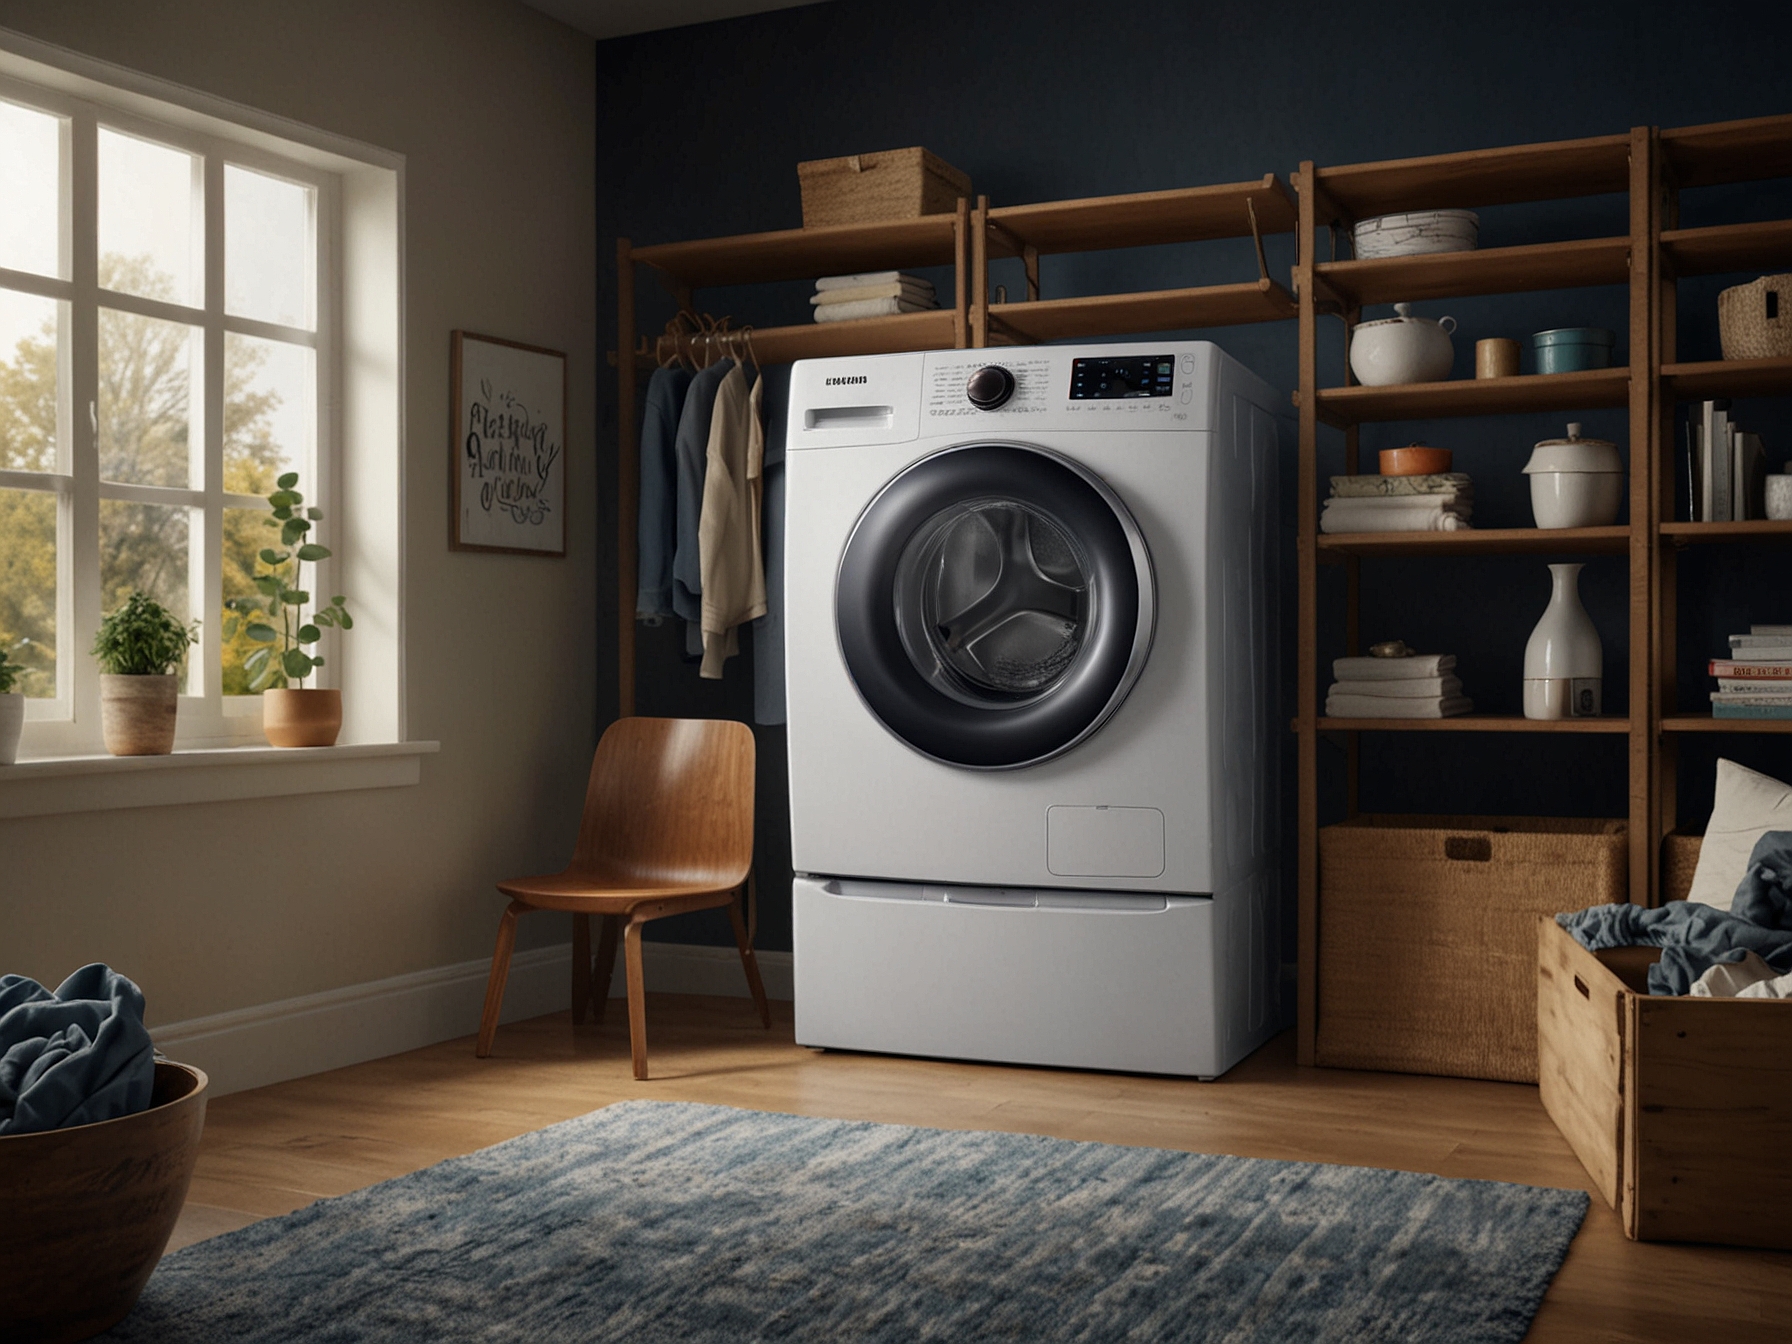 A Samsung washer and dryer set available at Walmart, highlighting the extra-large capacity, smart technology integration like voice control and SmartThings, and energy-efficient performance.